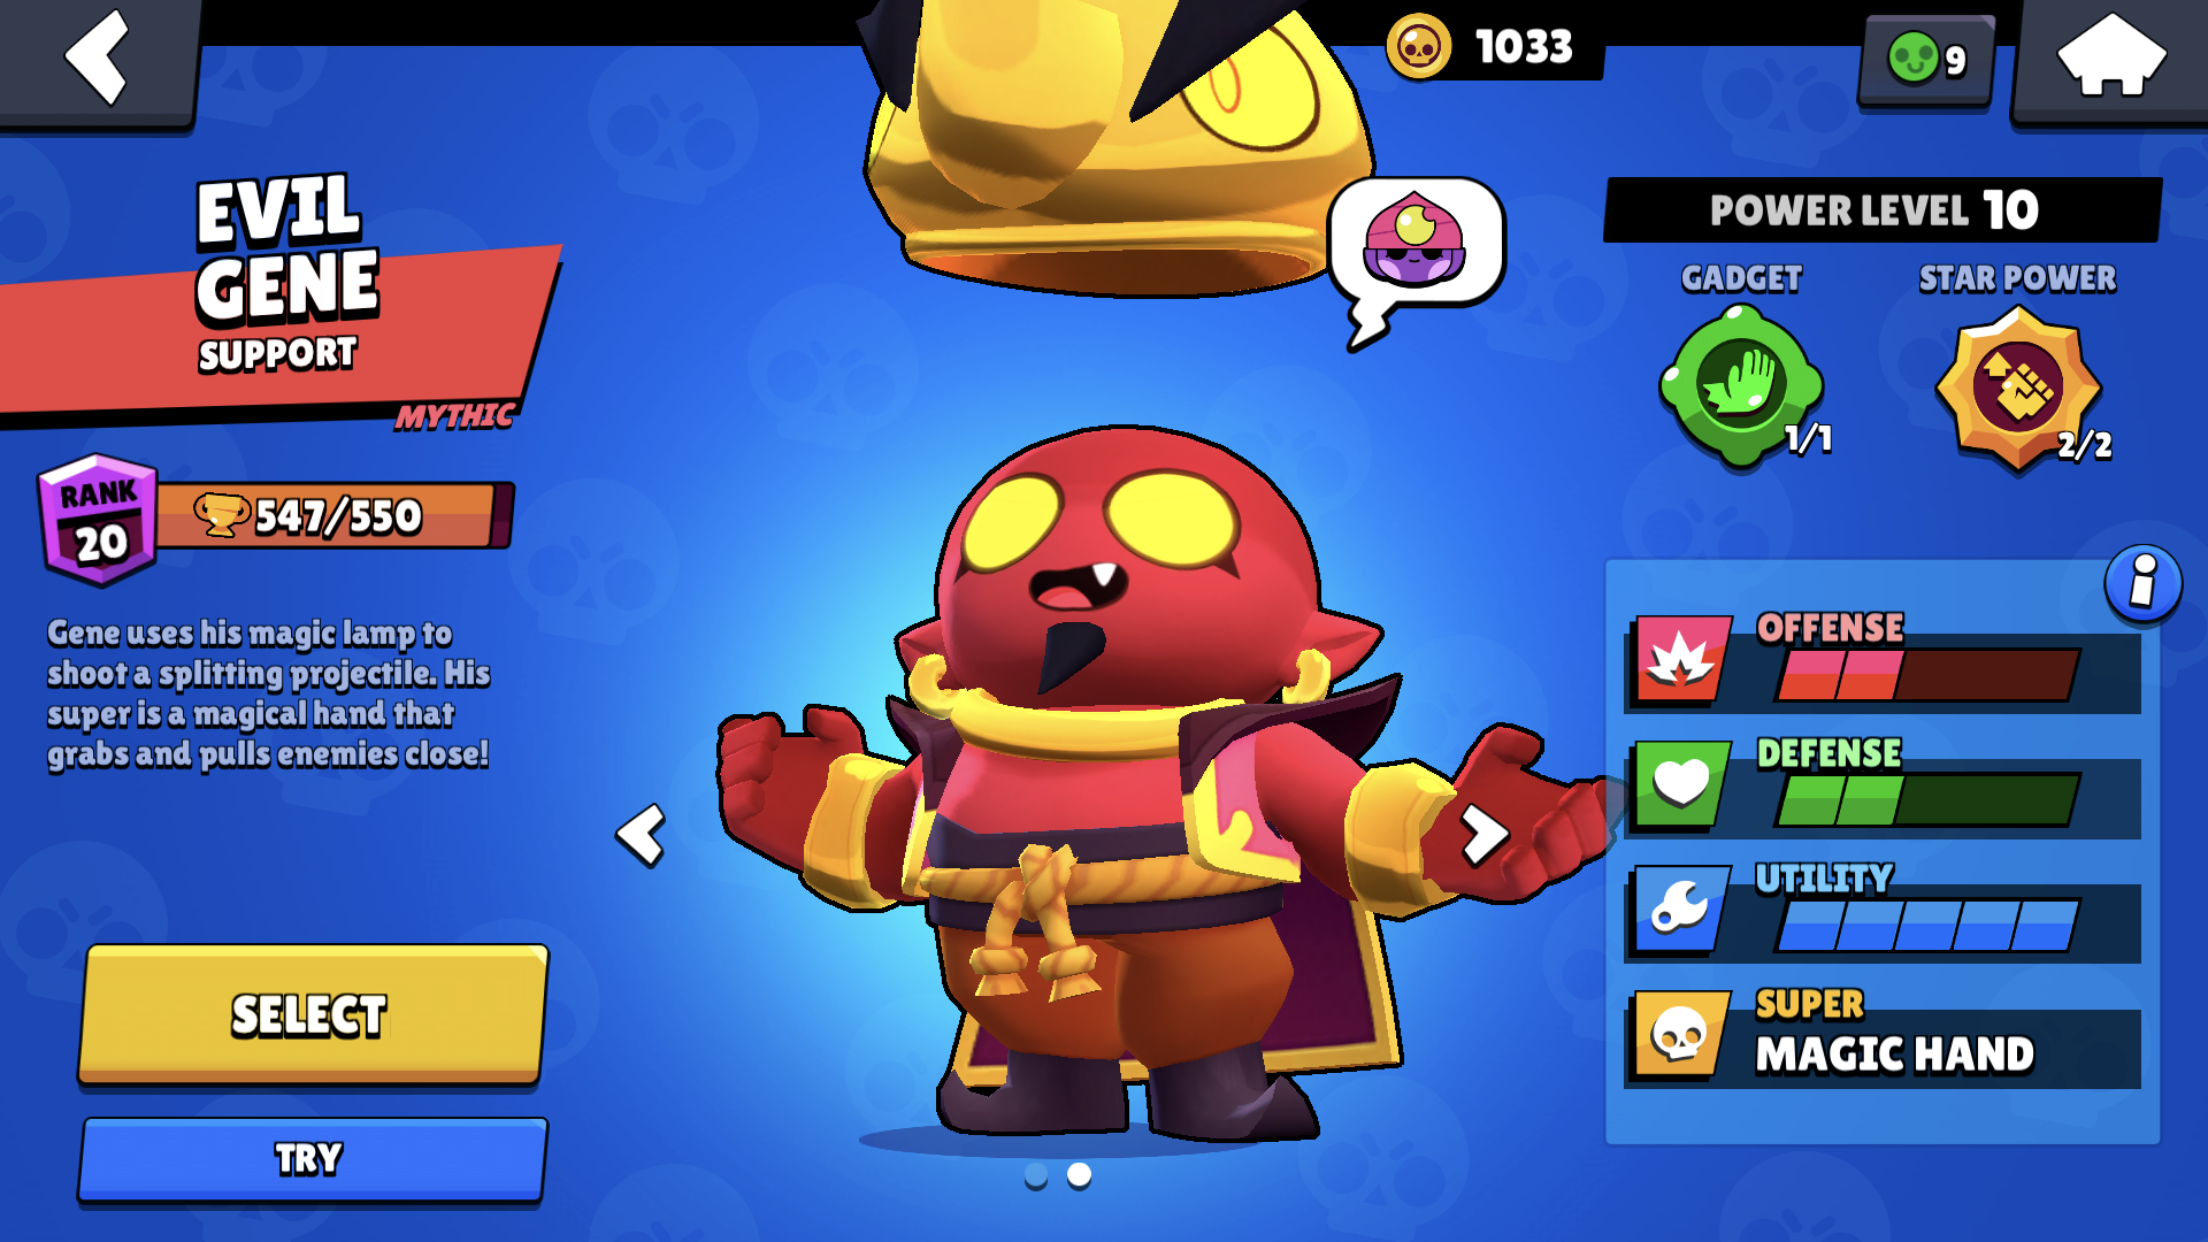 Selling Nearly Maxed Brawl Stars With Skins 40 40 Brawlers All Are Level 9 Epicnpc Marketplace - rank 20 brawl stars png